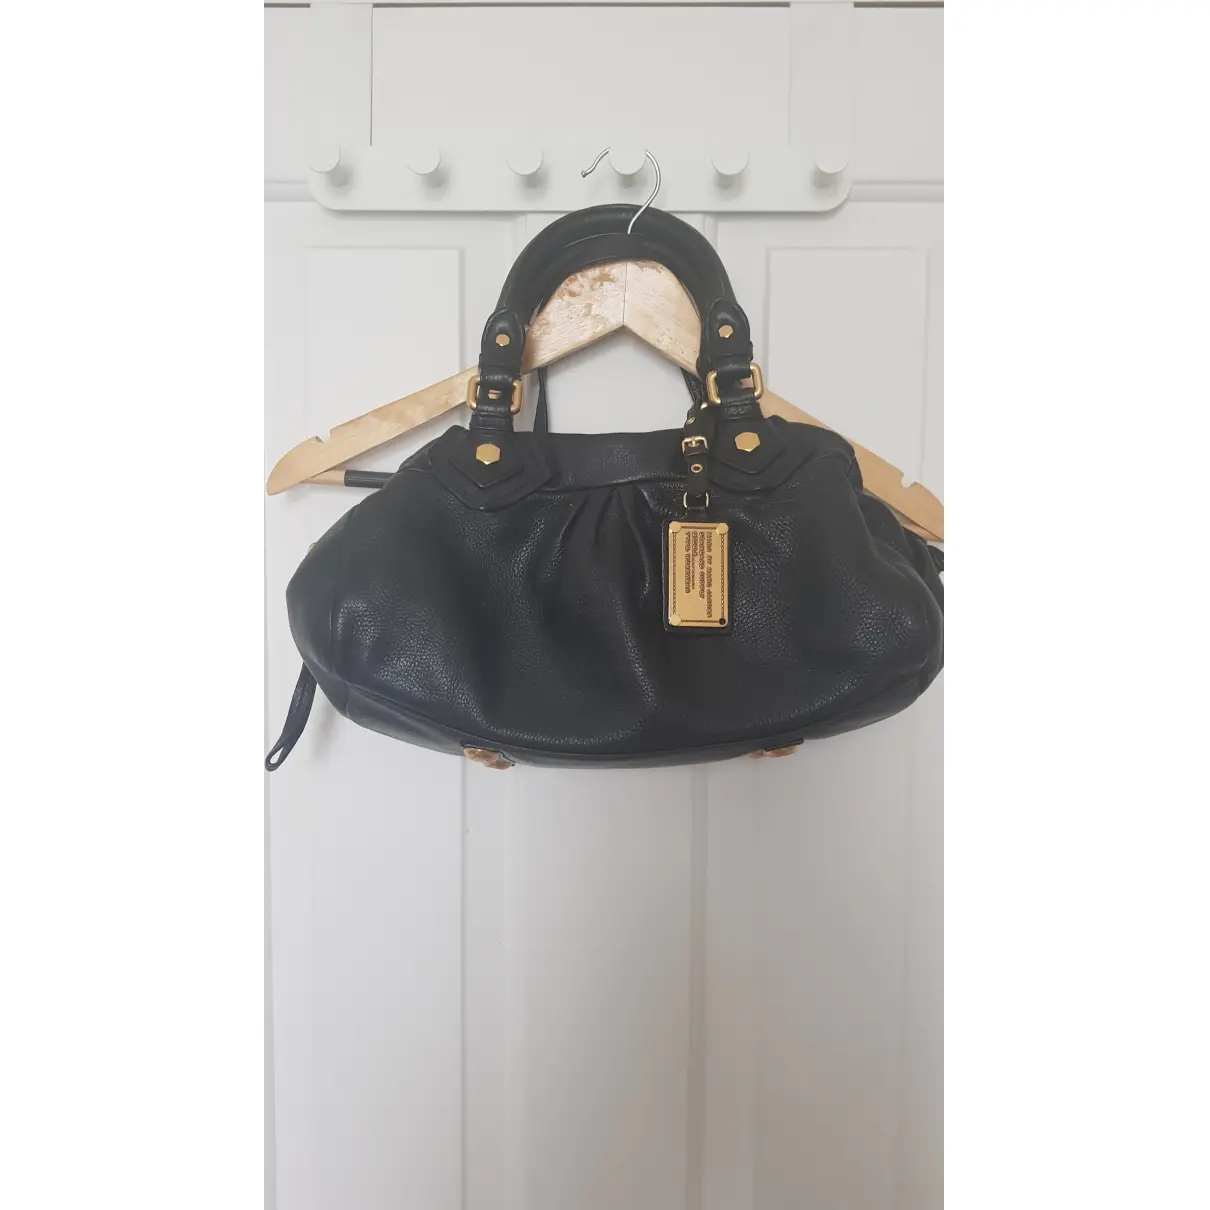 Buy Marc by Marc Jacobs Classic Q leather handbag online